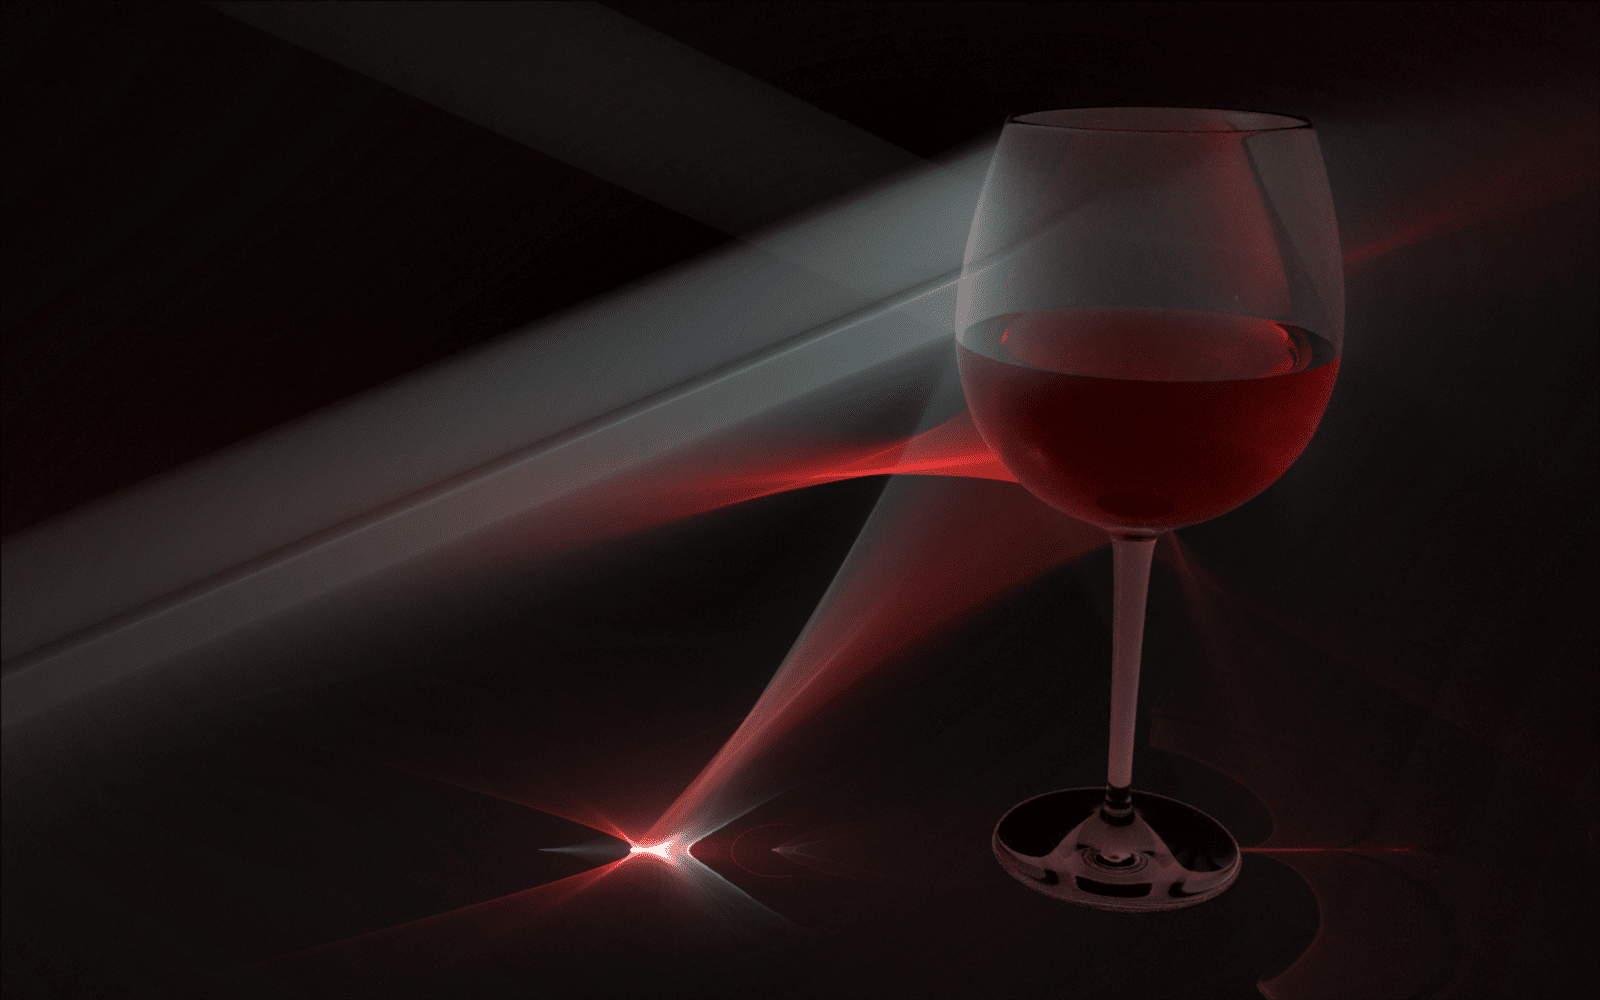 Computer rendering of a wine glass caustic